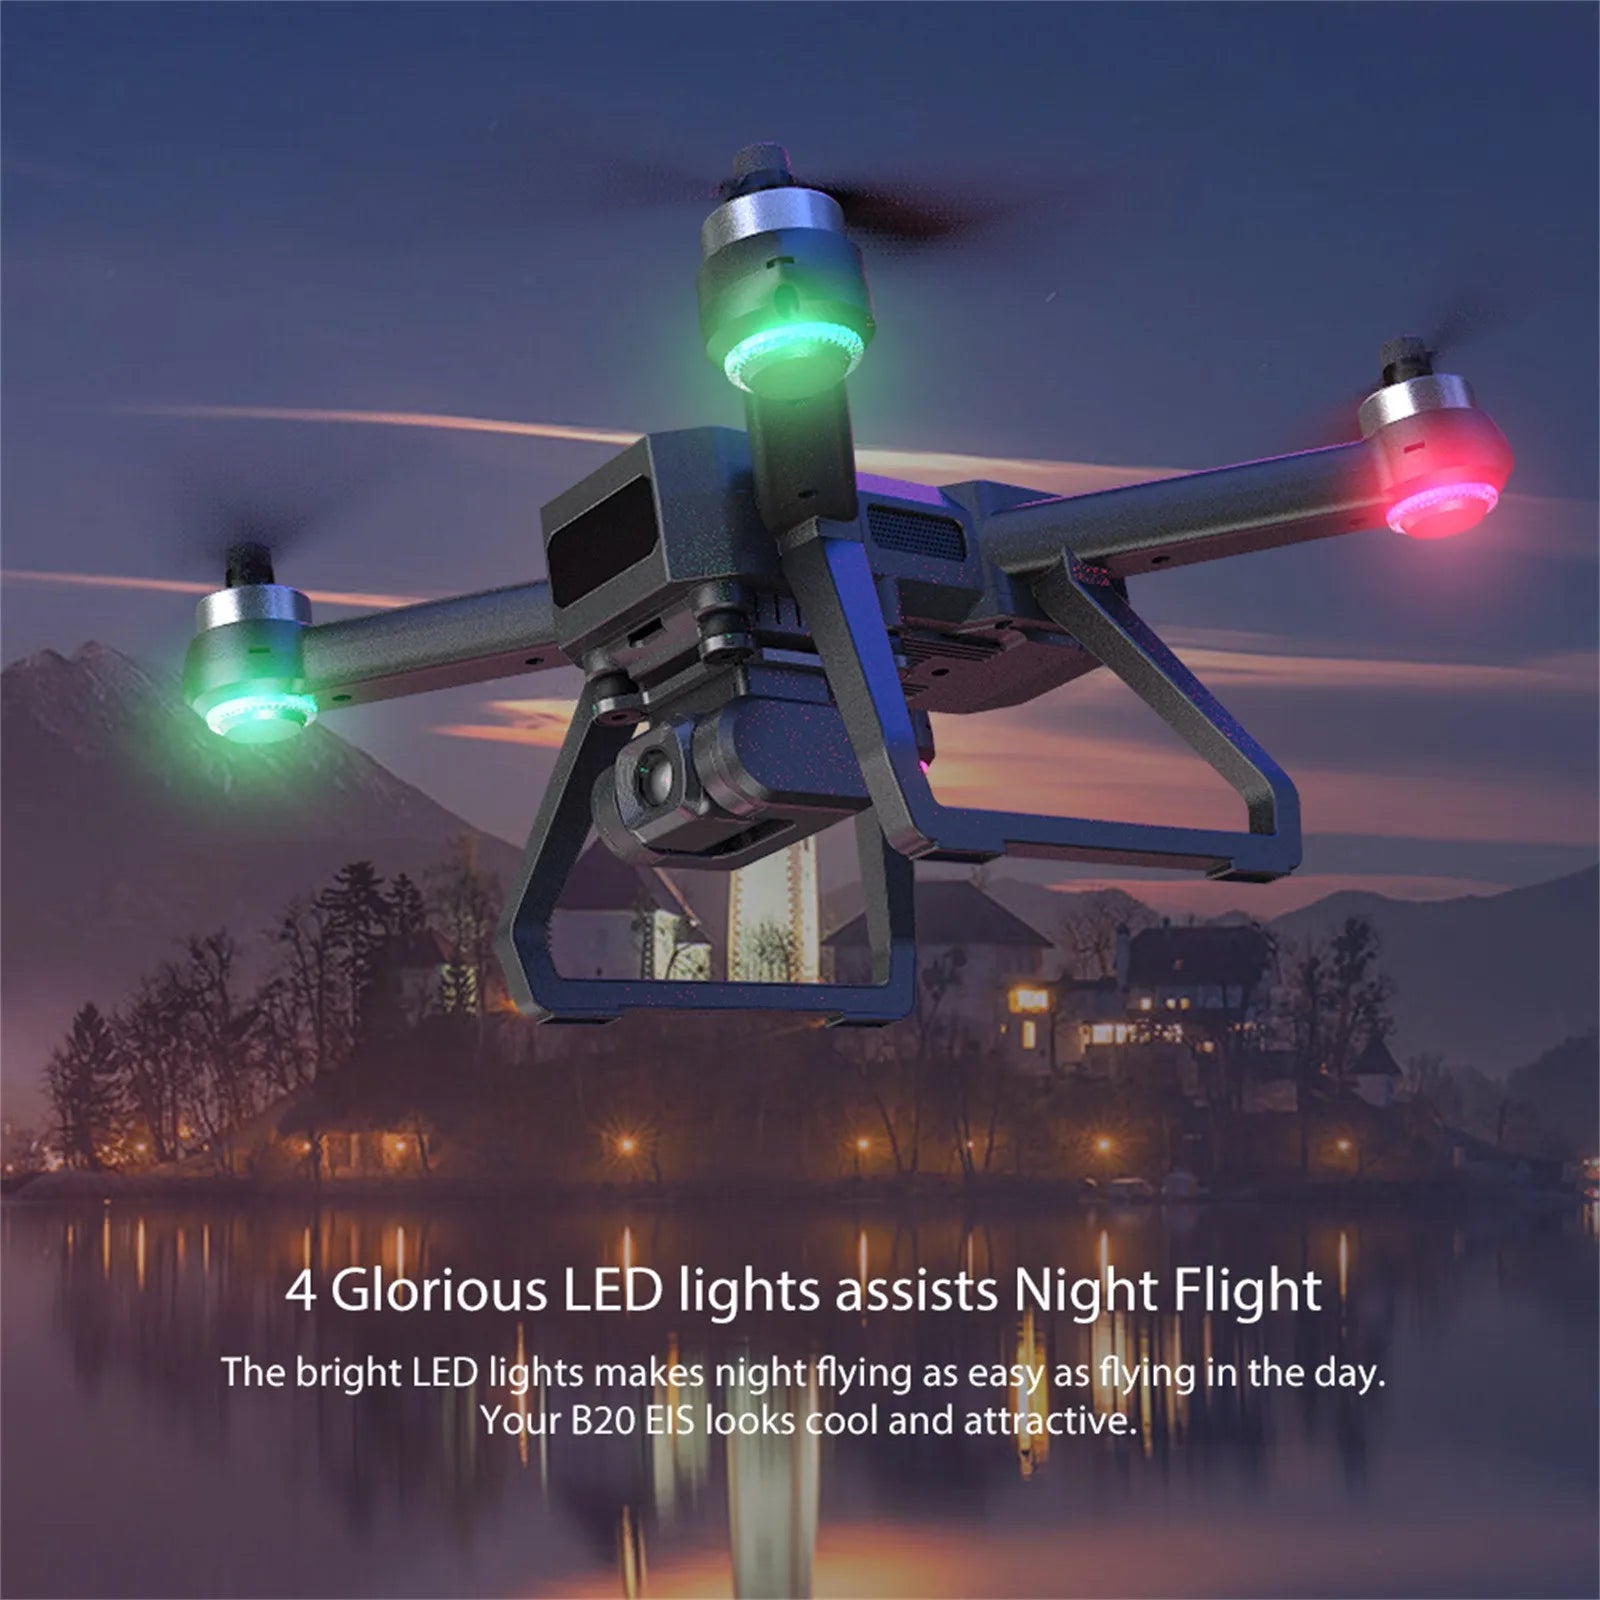 Mjx Bugs 20 Drone, bright LED lights makes night flying as easy as flying in the Your B20 EIS looks cool